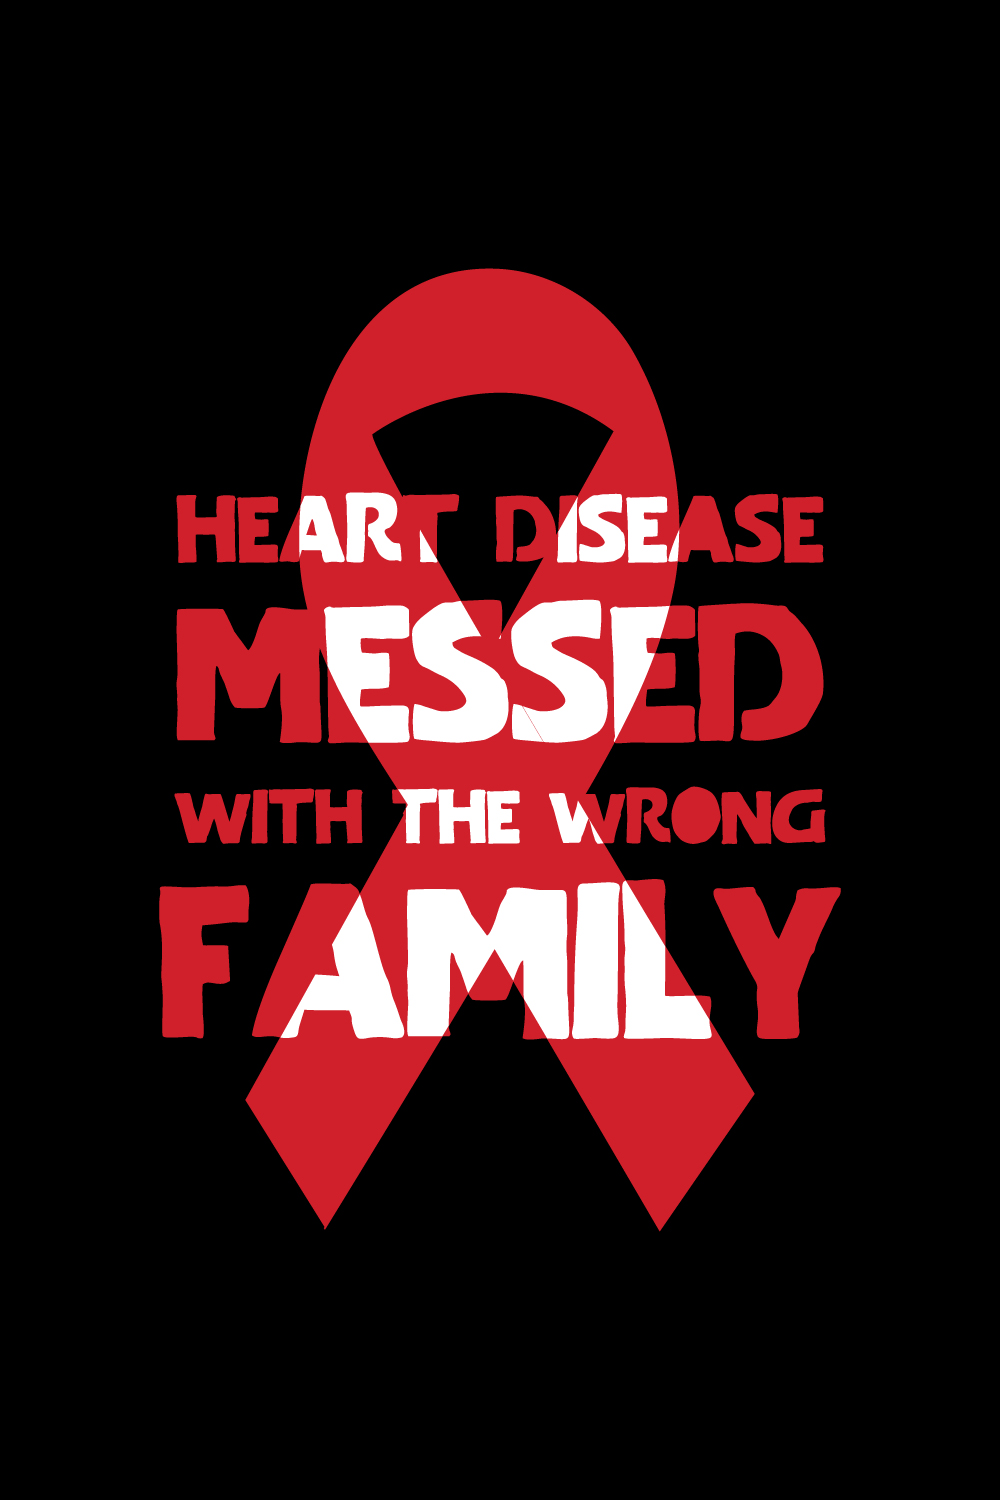 Heart Disease Warrior illustrations for print-ready T-Shirts design pinterest preview image.